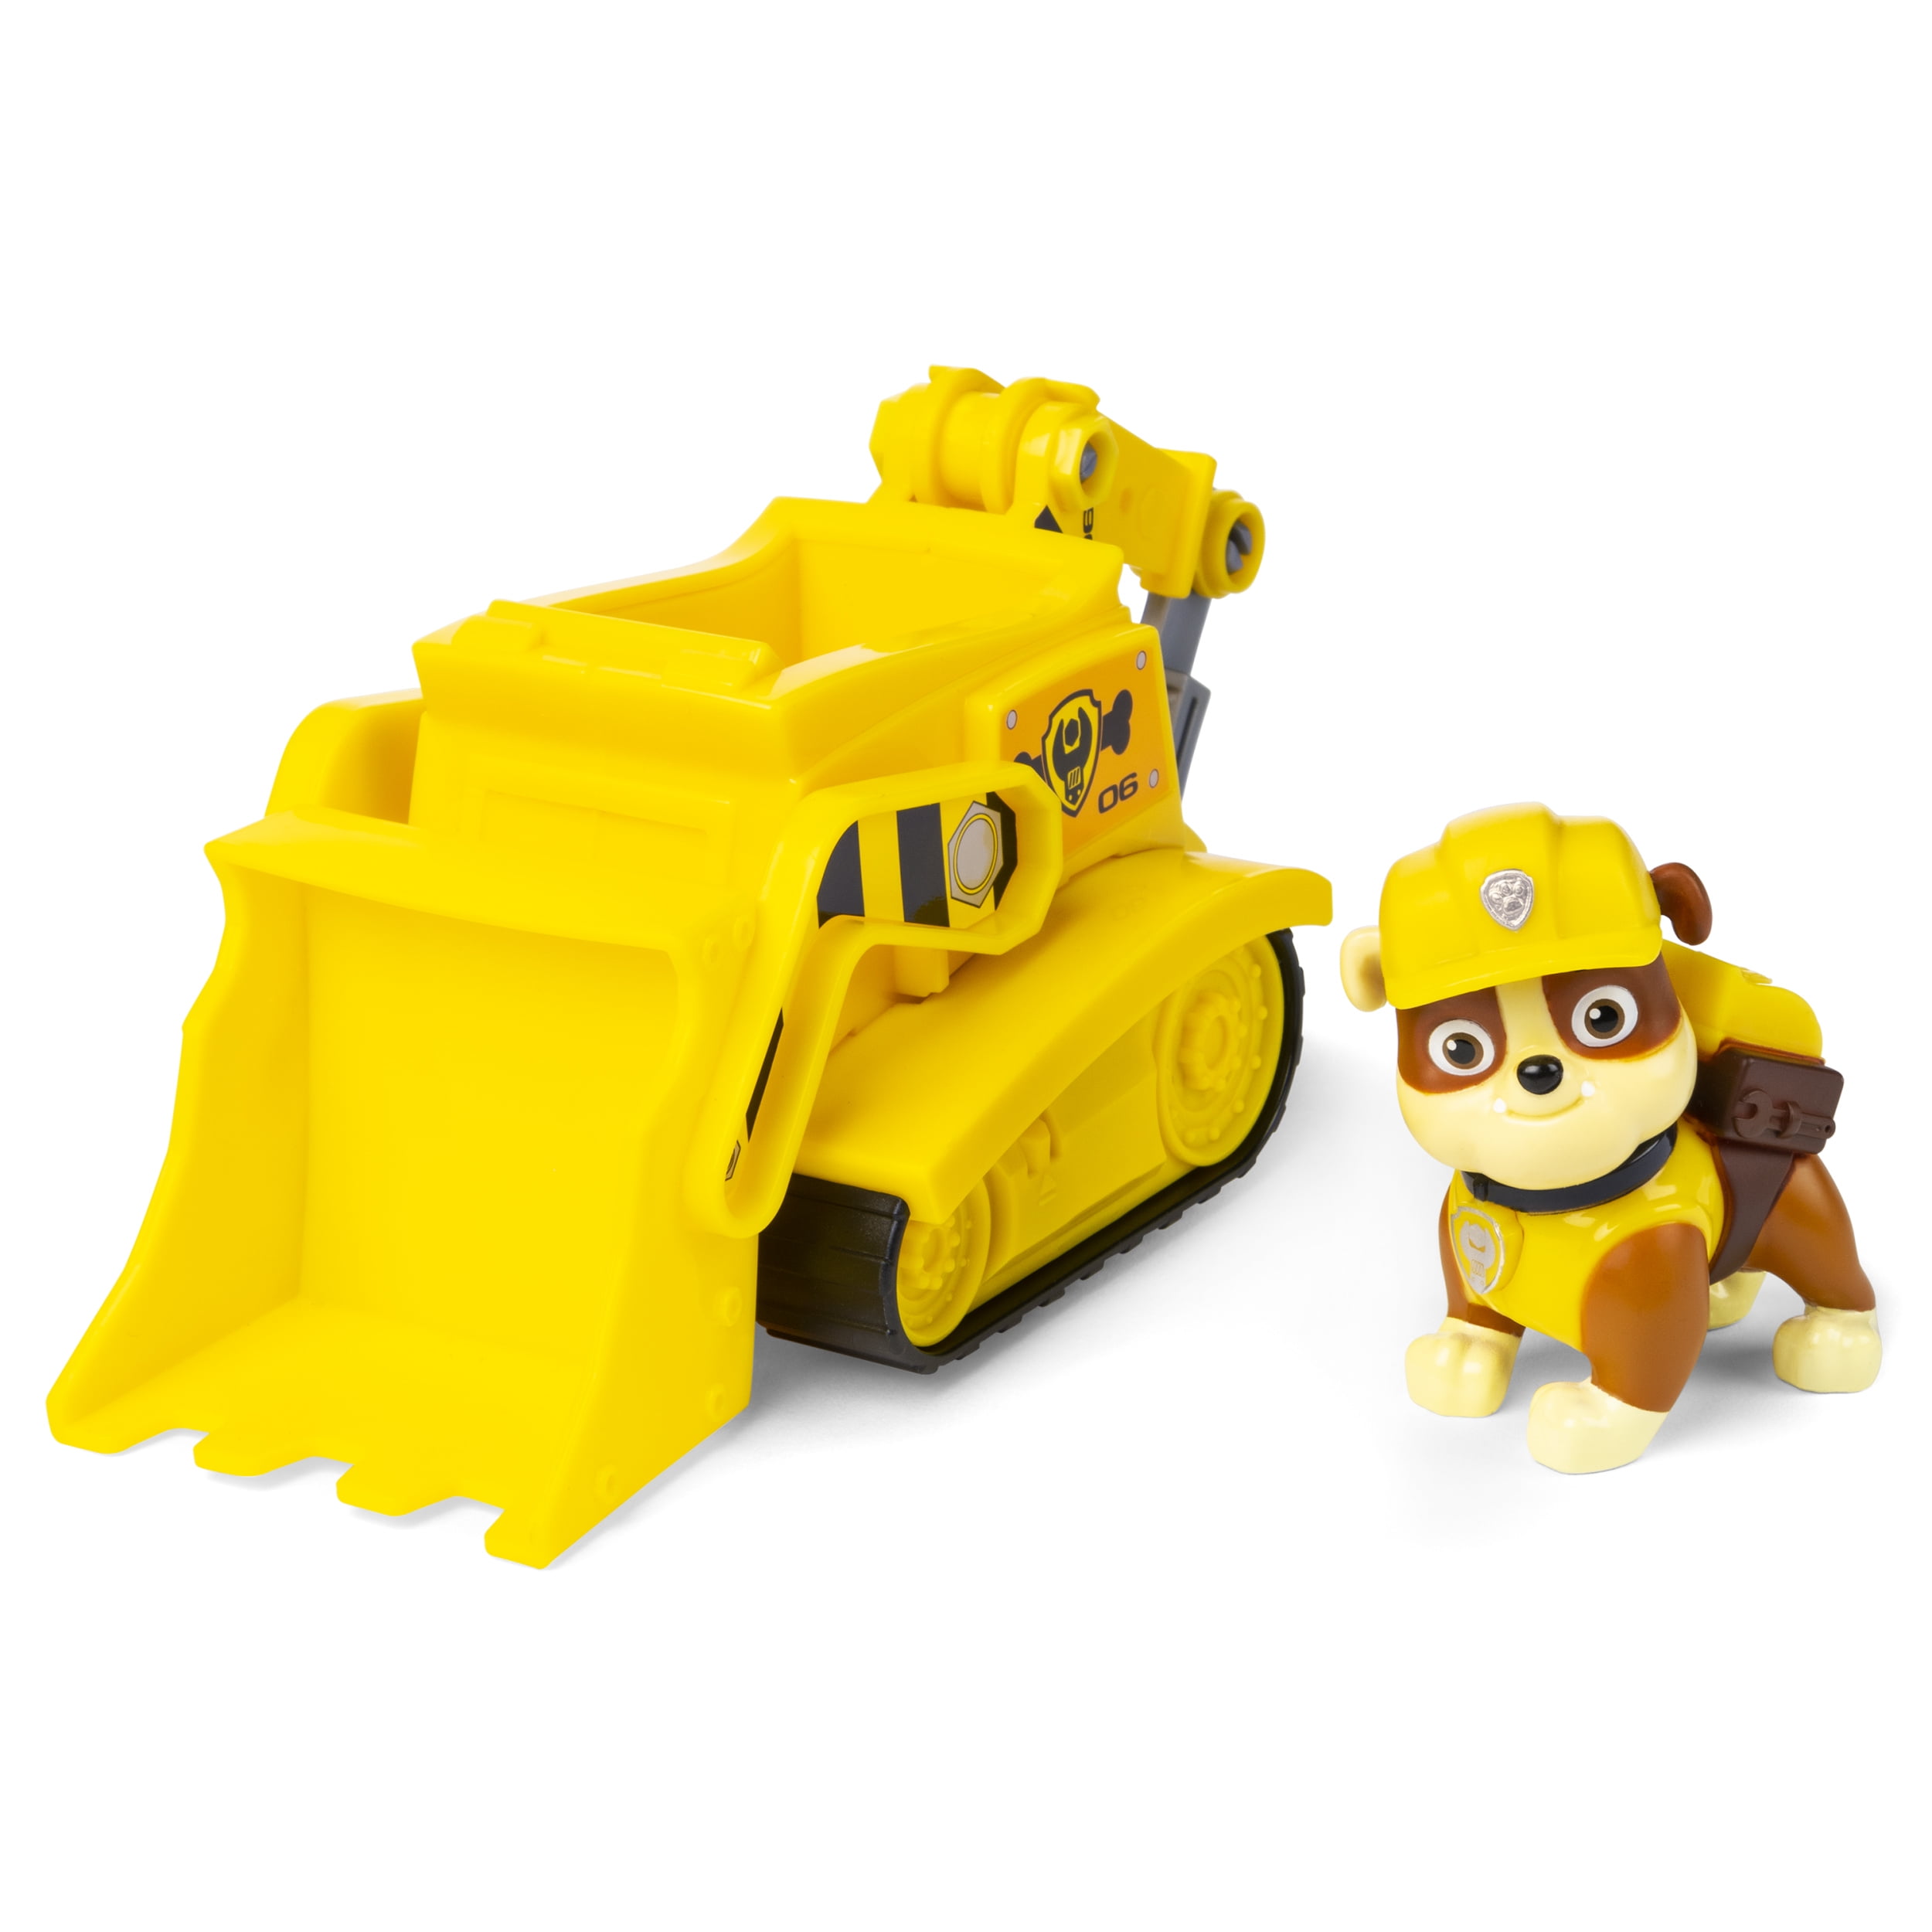 PAW Patrol, Rubble's Bulldozer Vehicle Collectible Figure, for Kids 3 and Up - Walmart.com